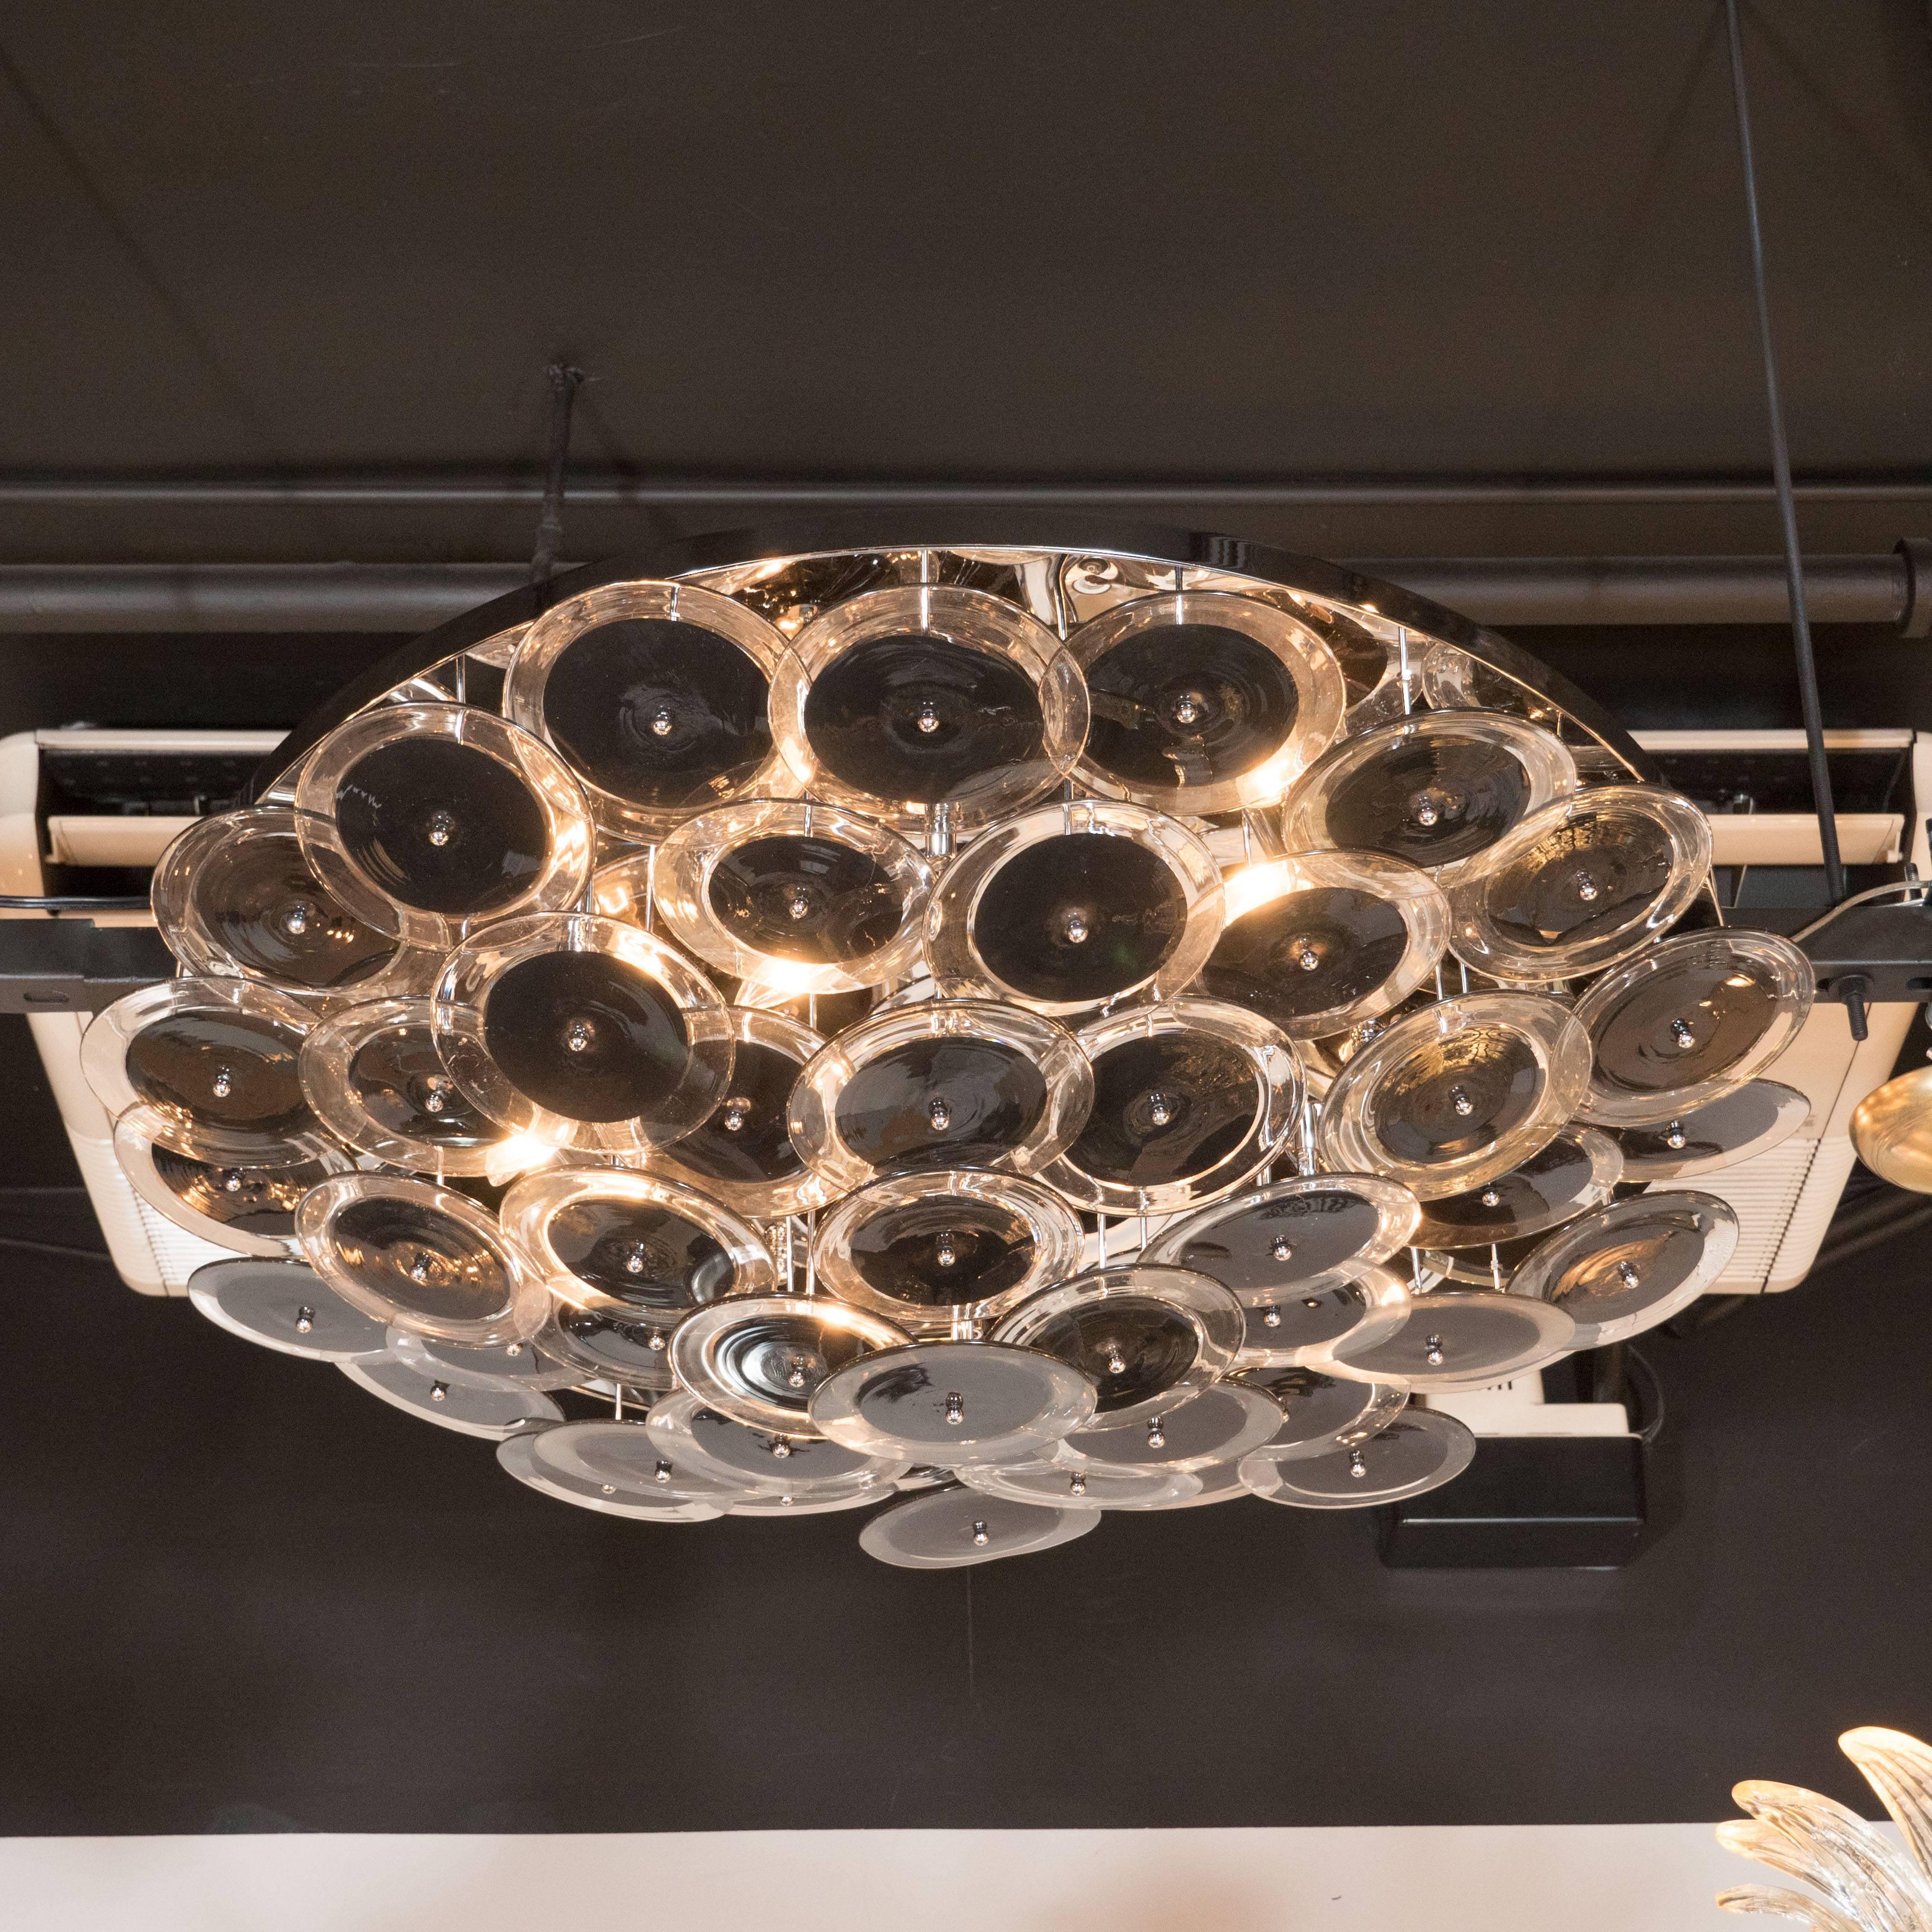 Stunning Vistosi flush mount chandelier with handblown Murano black and clear glass discs. This flush mount chandelier consists of an array of numerous handblown Murano clear glass discs that each incorporate a central opaque texture that is